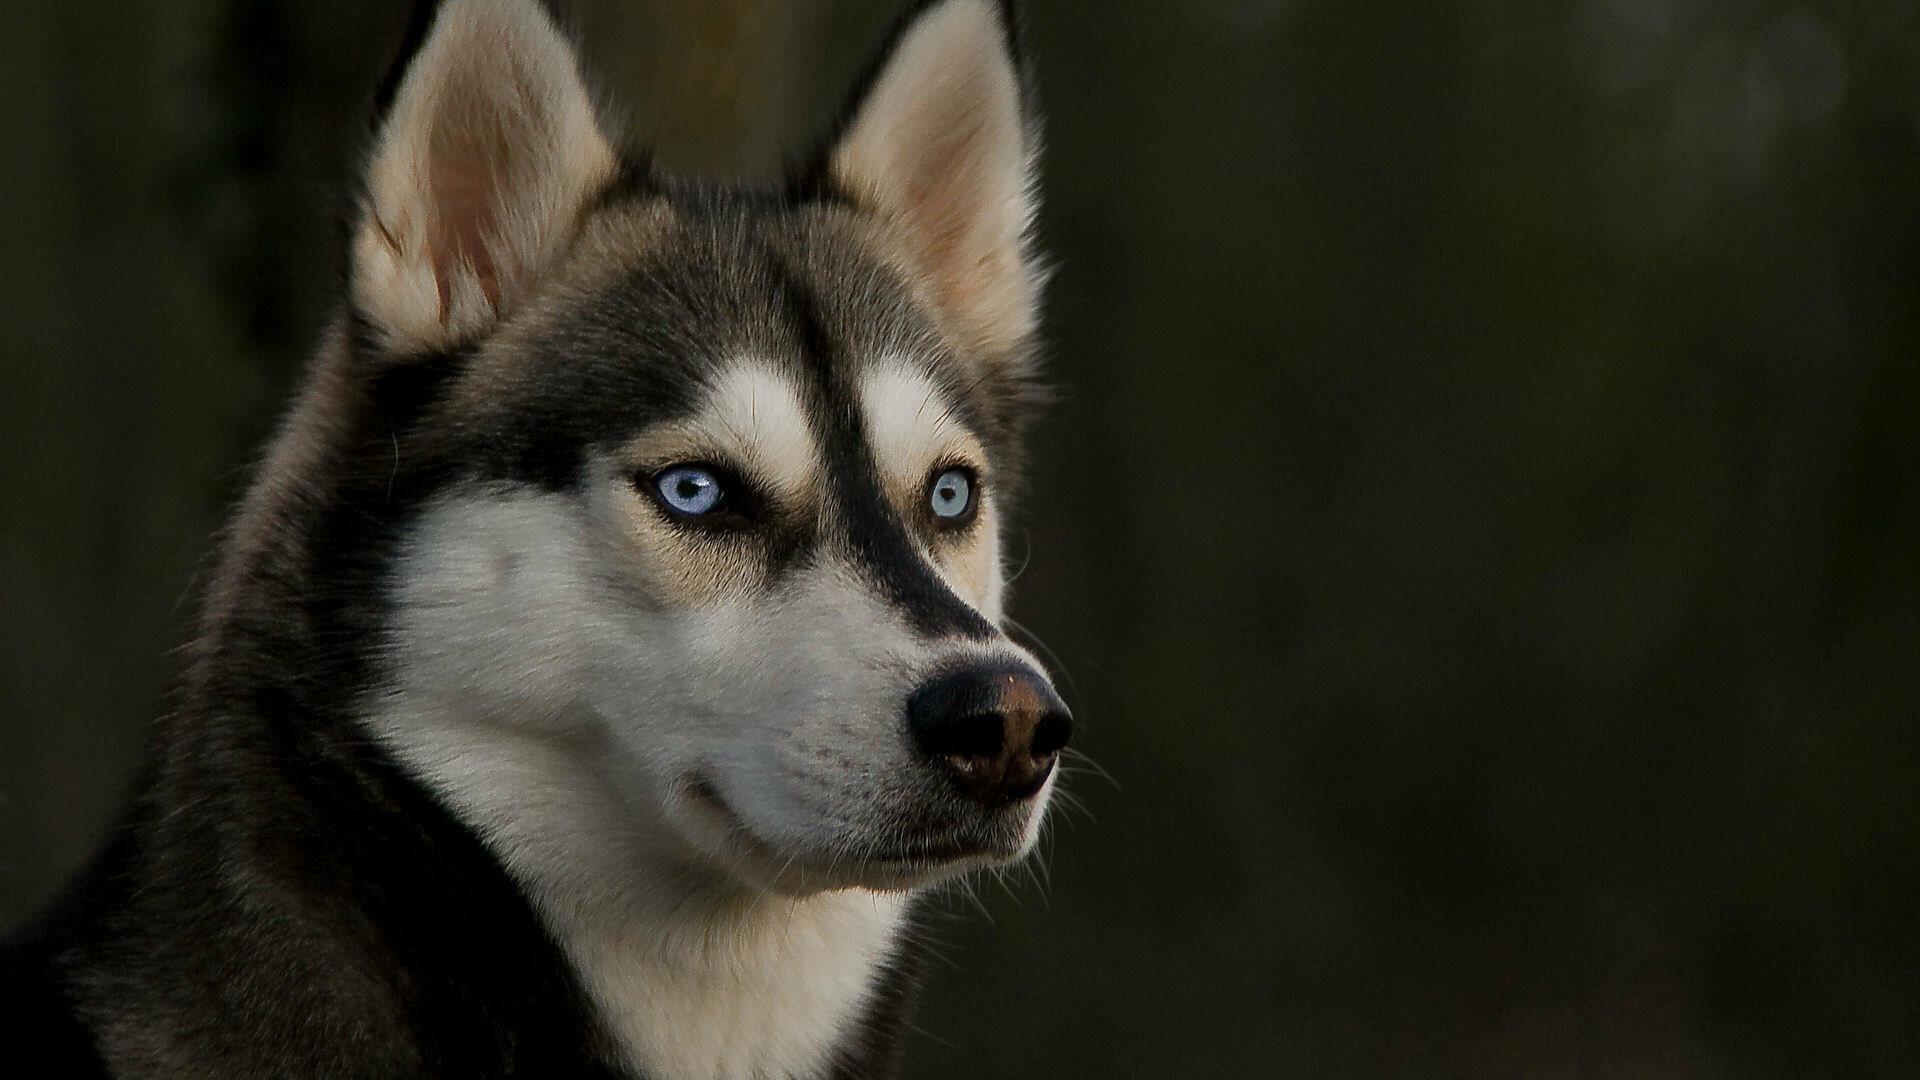 Siberian Husky: The breed can be extremely clever about escaping. 1920x1080 Full HD Background.